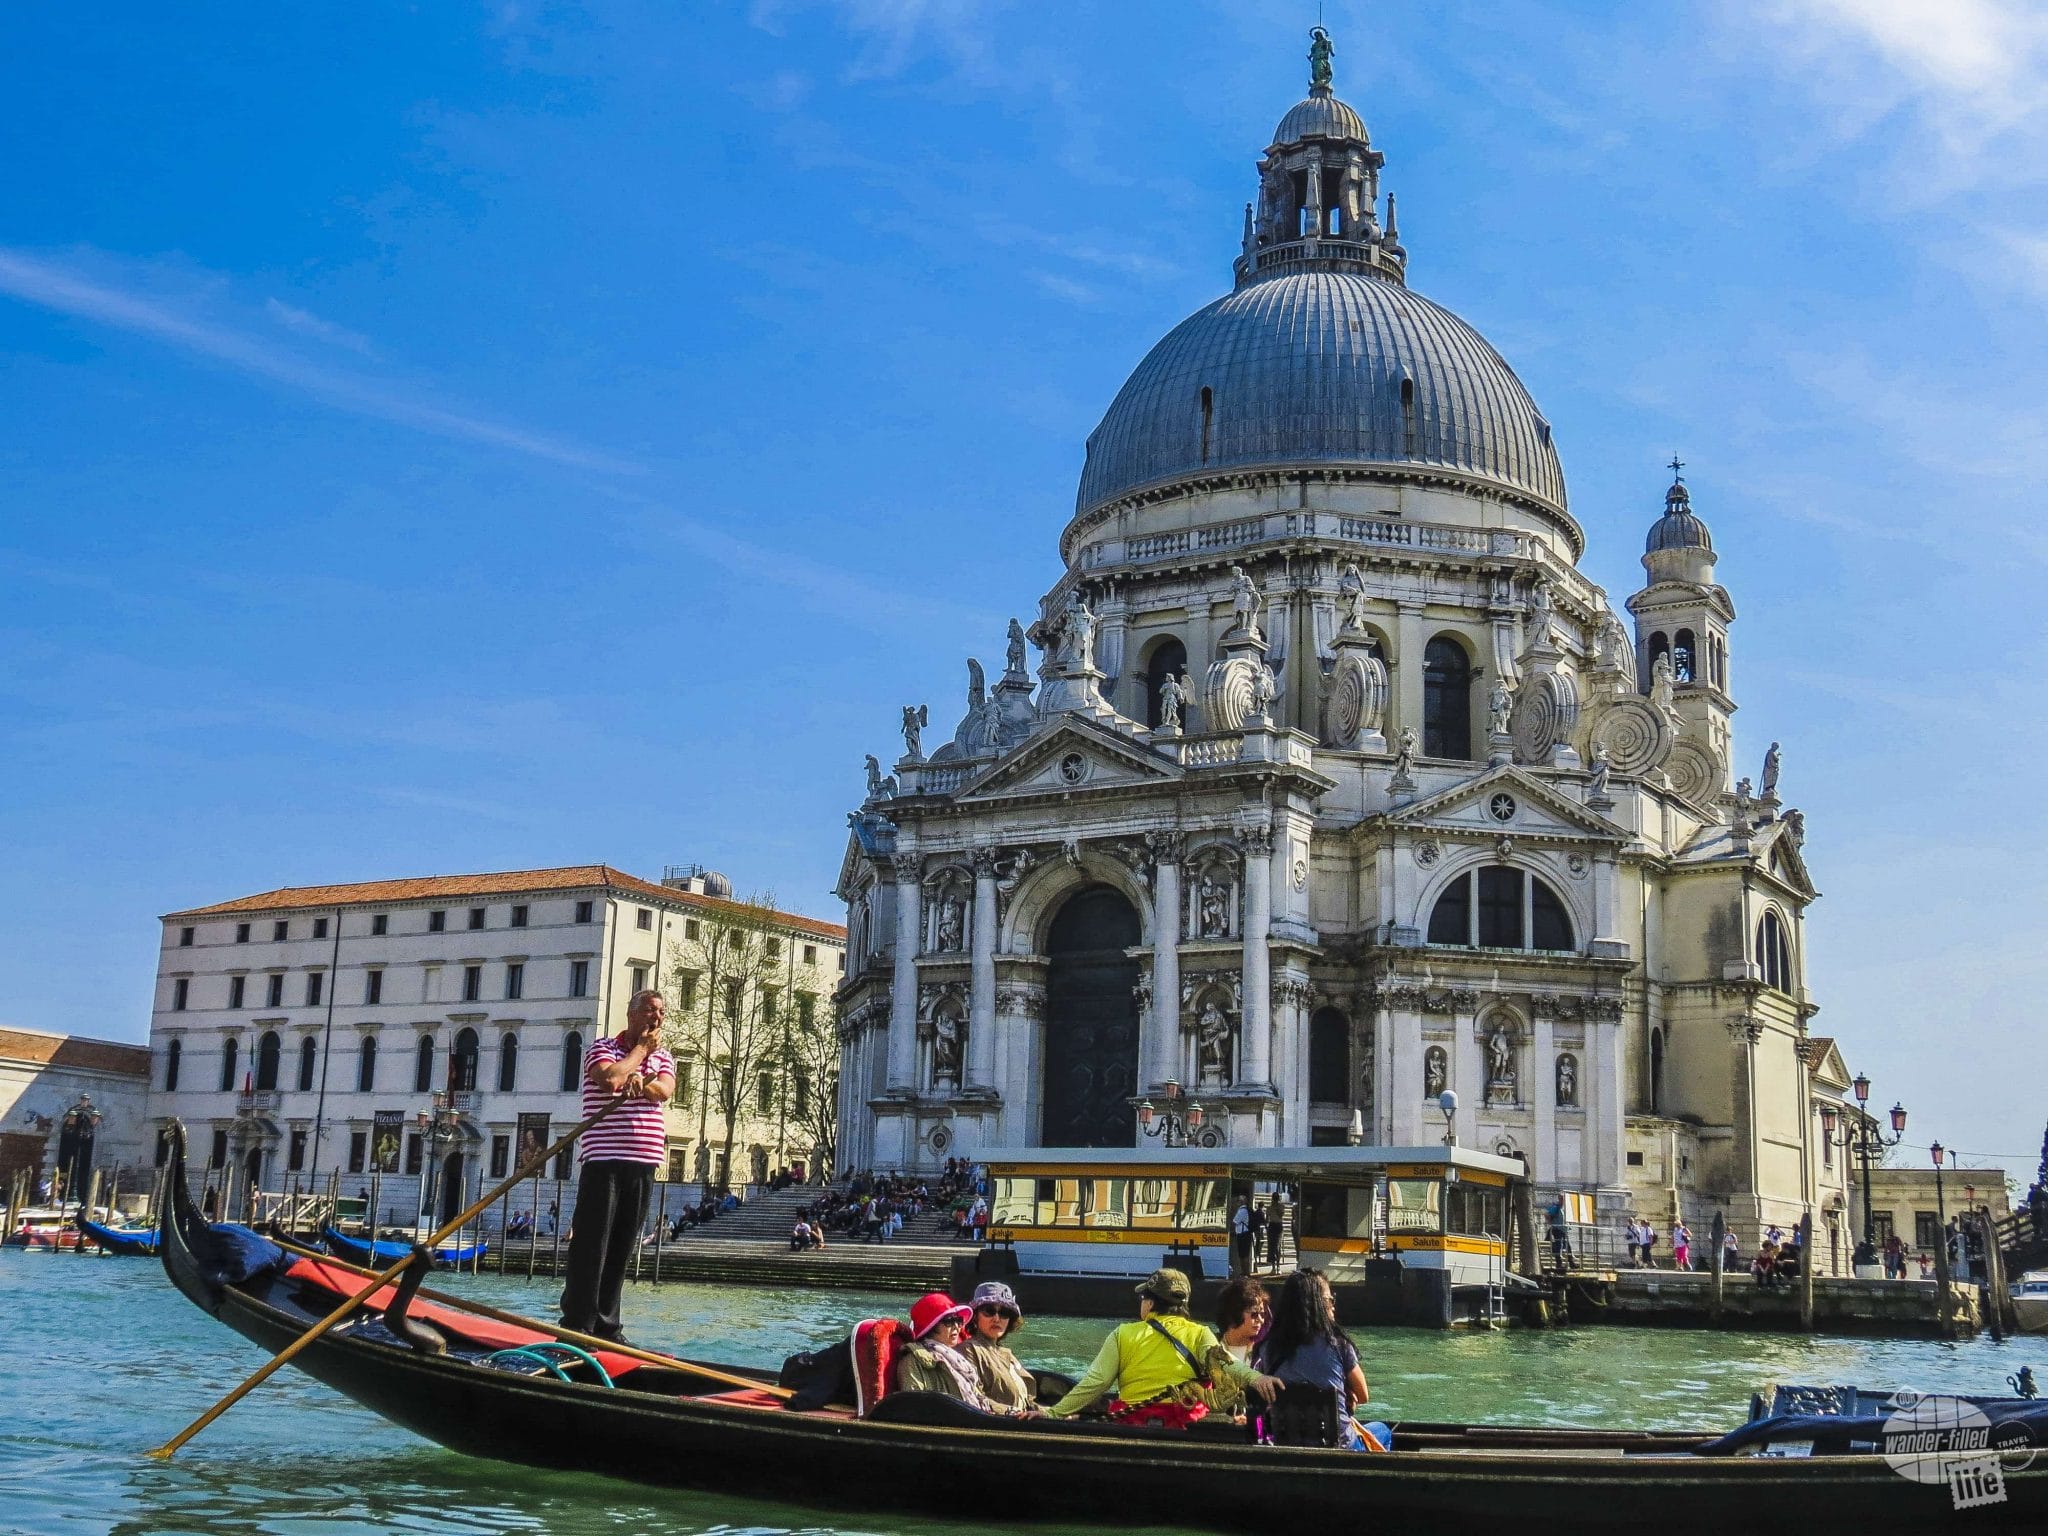 Seeing the Grand Canal in Venice by gondola is an experience not to be missed.